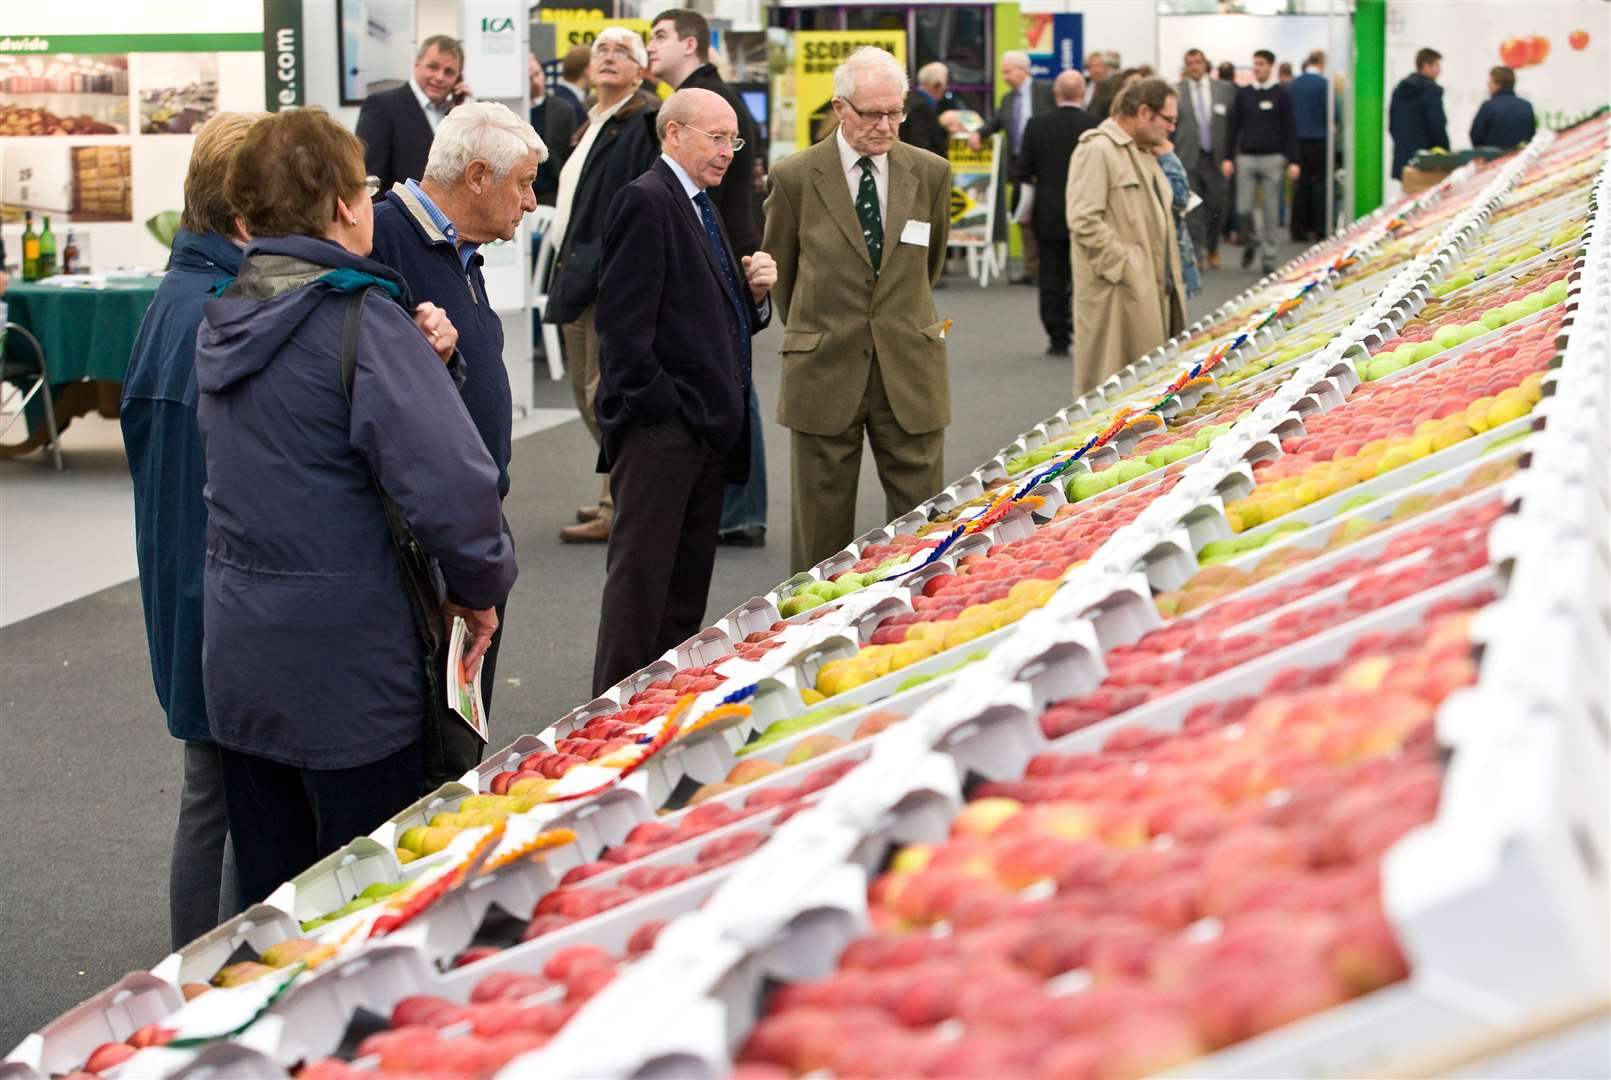 Ray Vale was closely connected with the National Fruit Show for 26 years